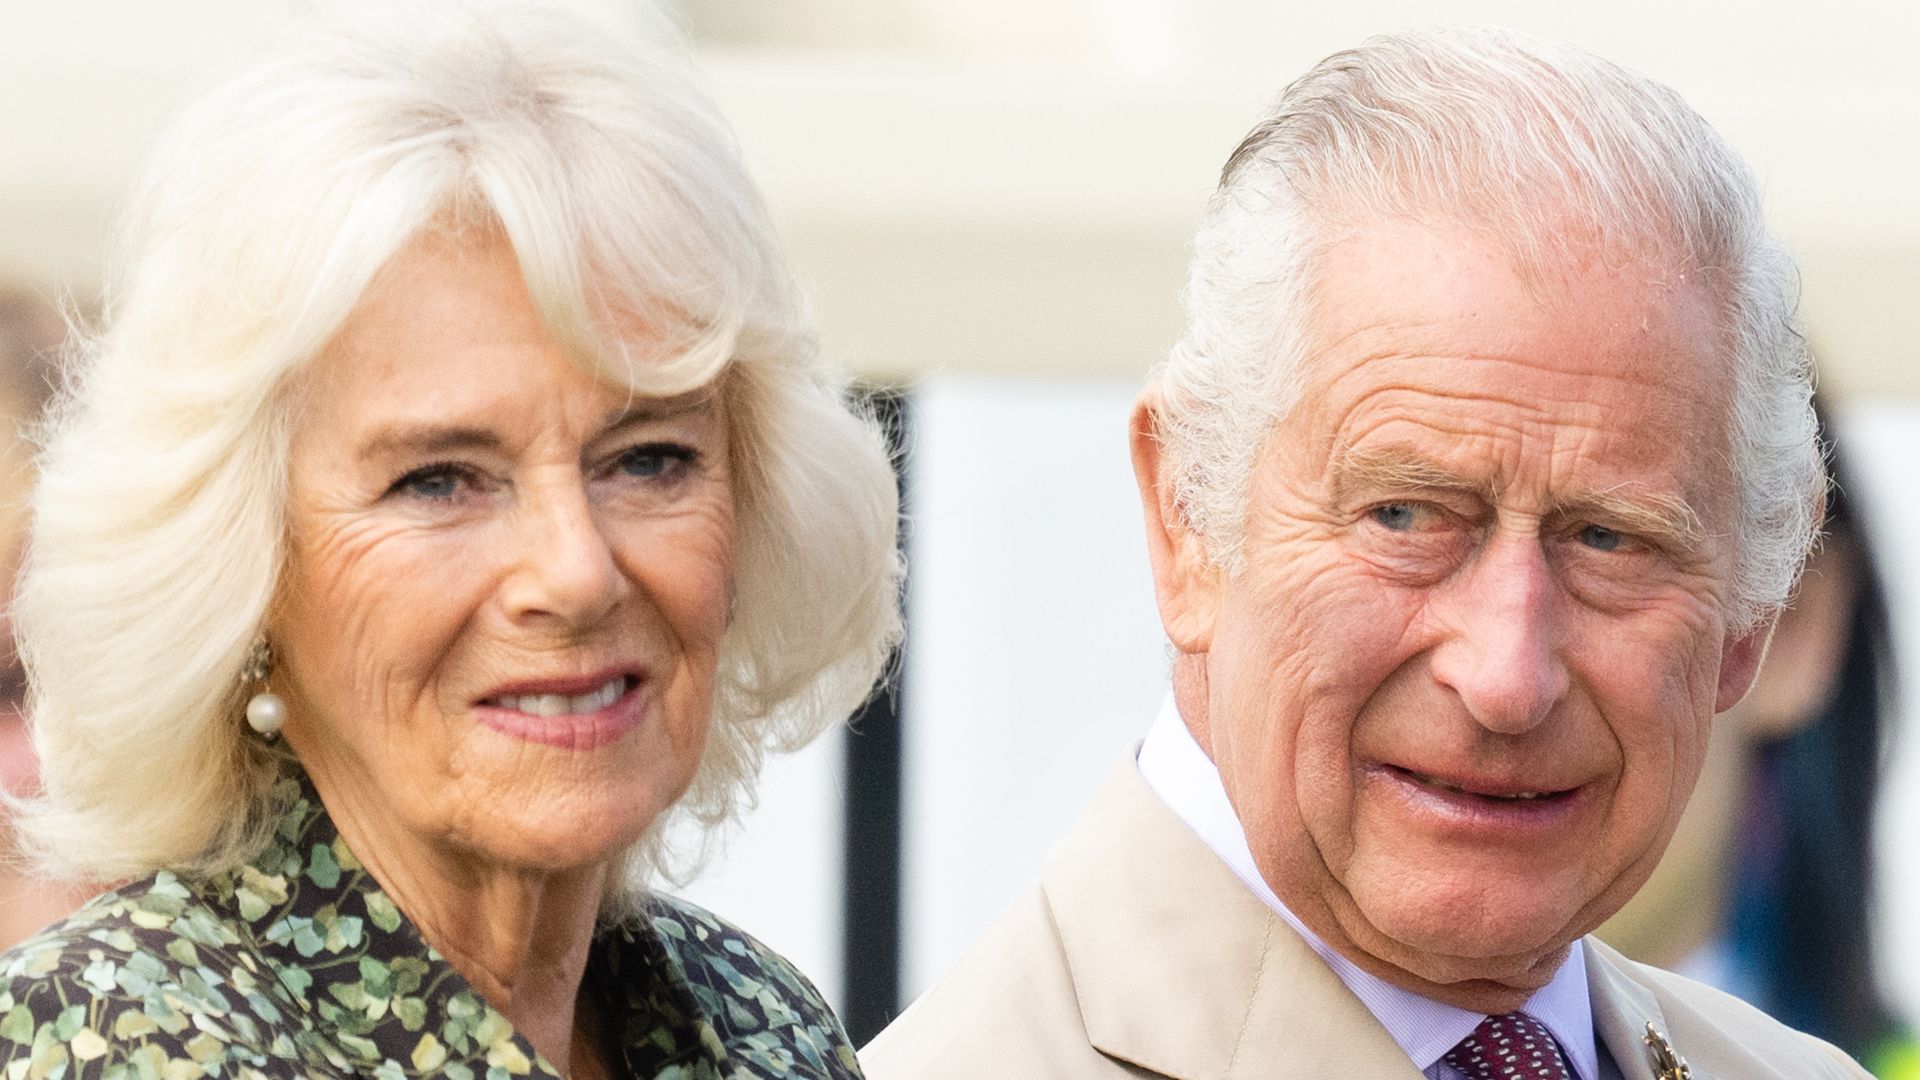 King Charles III and Queen Camilla visit Sandringham Flower Show 